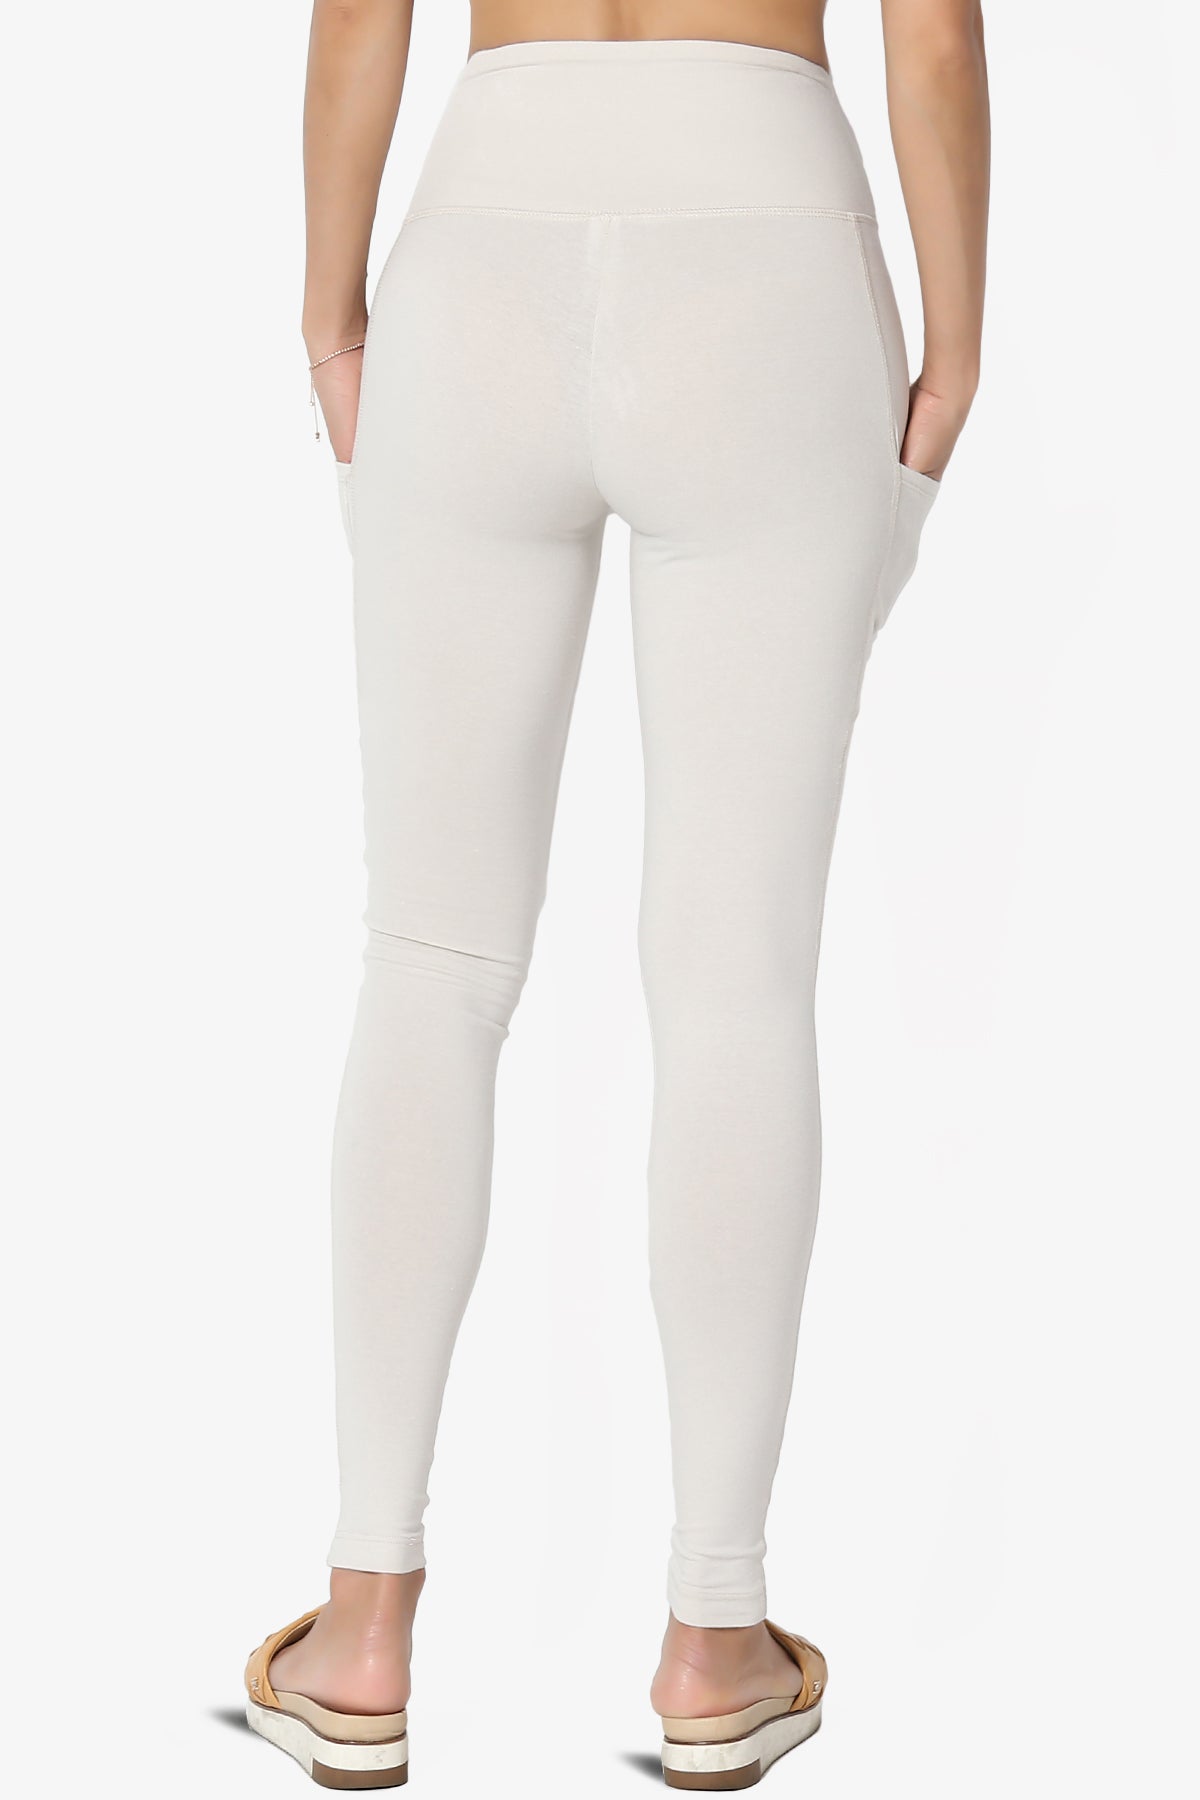 Ansley Luxe Cotton Leggings with Pockets PLUS  Leggings are not pants, Cotton  leggings, Quality leggings